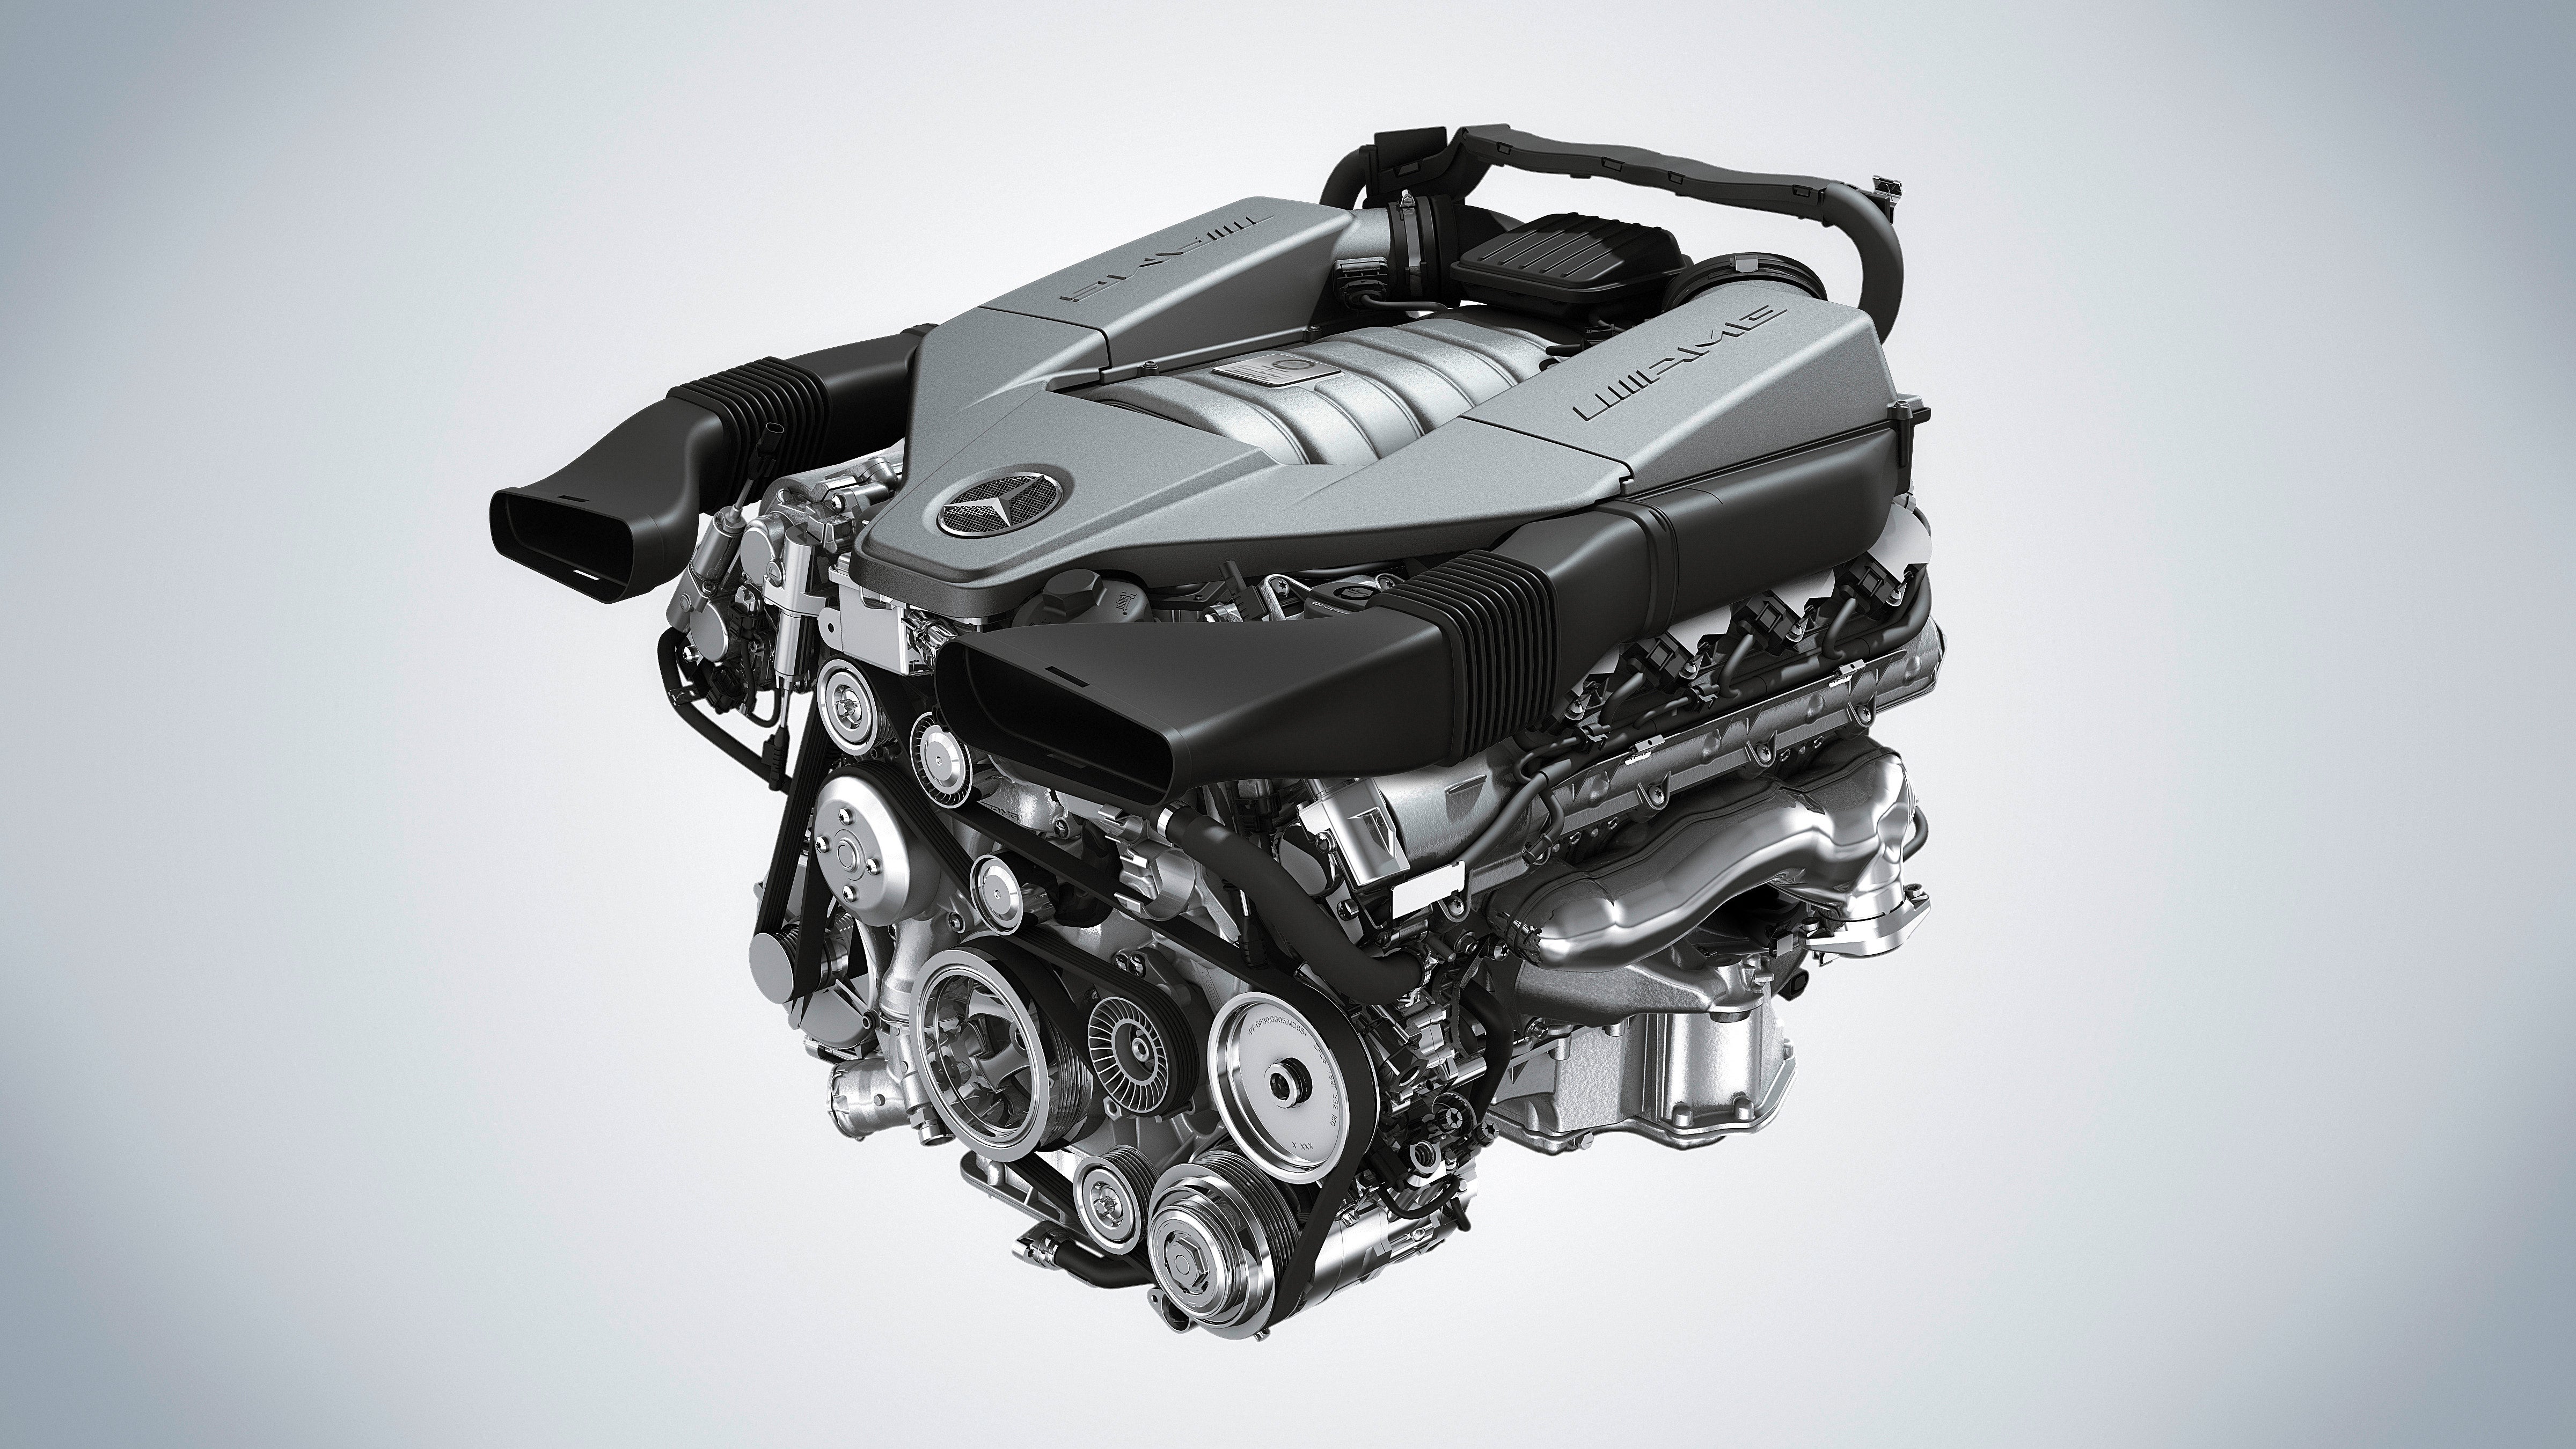 In Pictures: The Greatest Car Engines Of The Past Decade